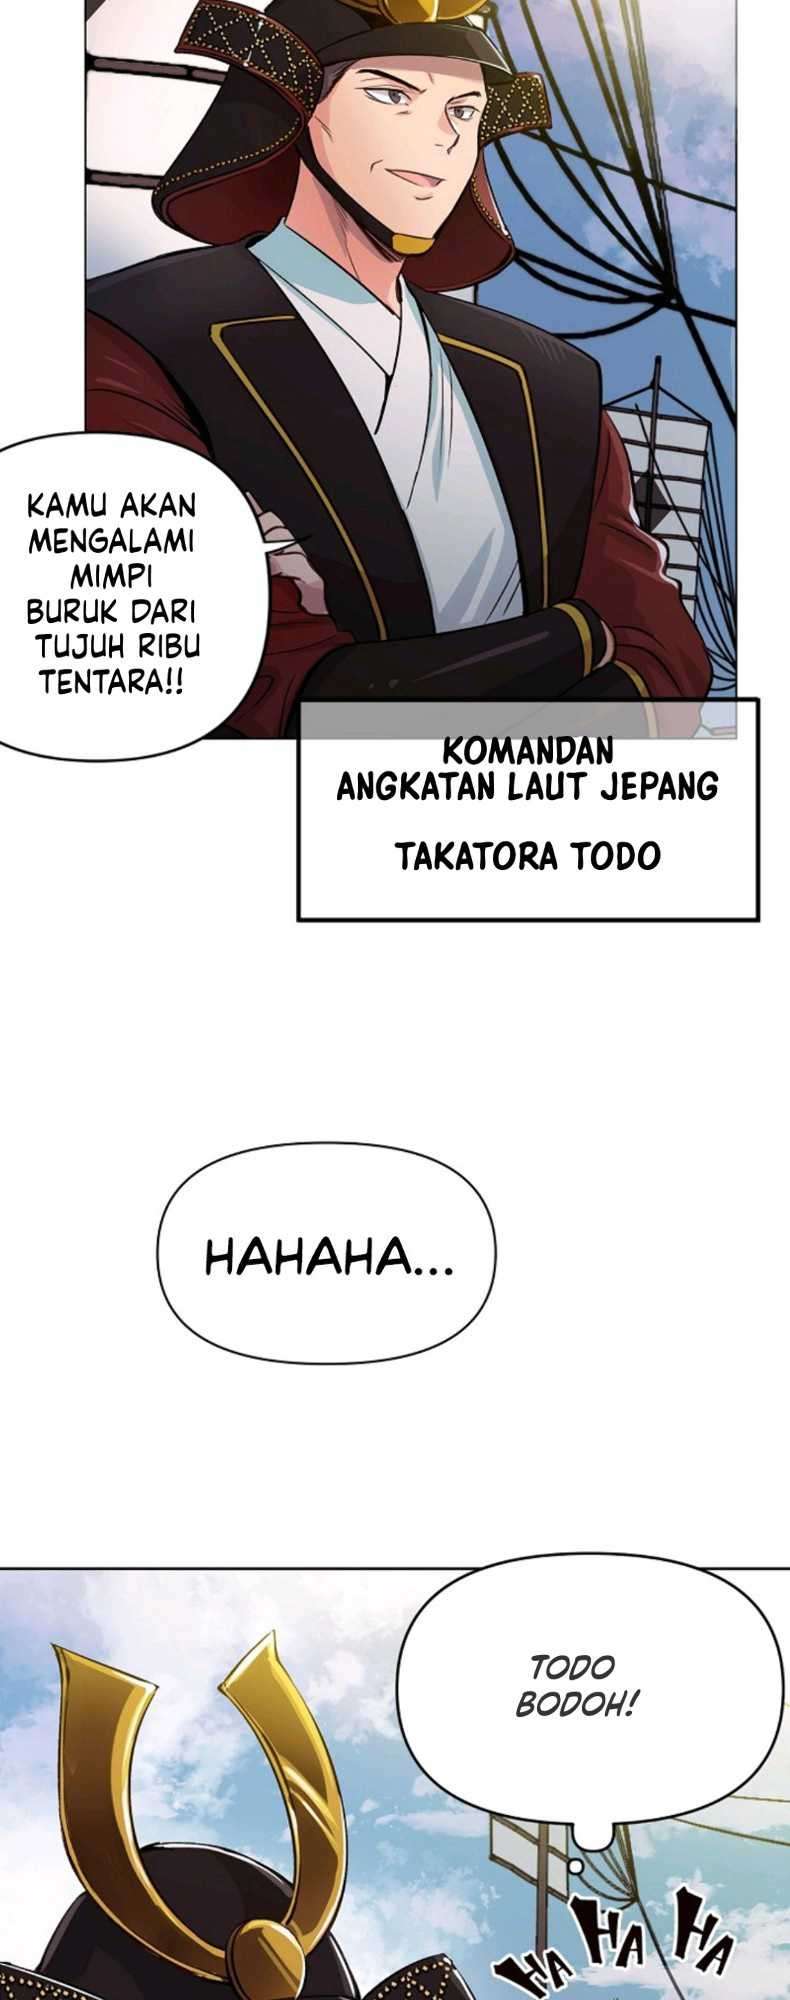 Time Roulette Chapter 03